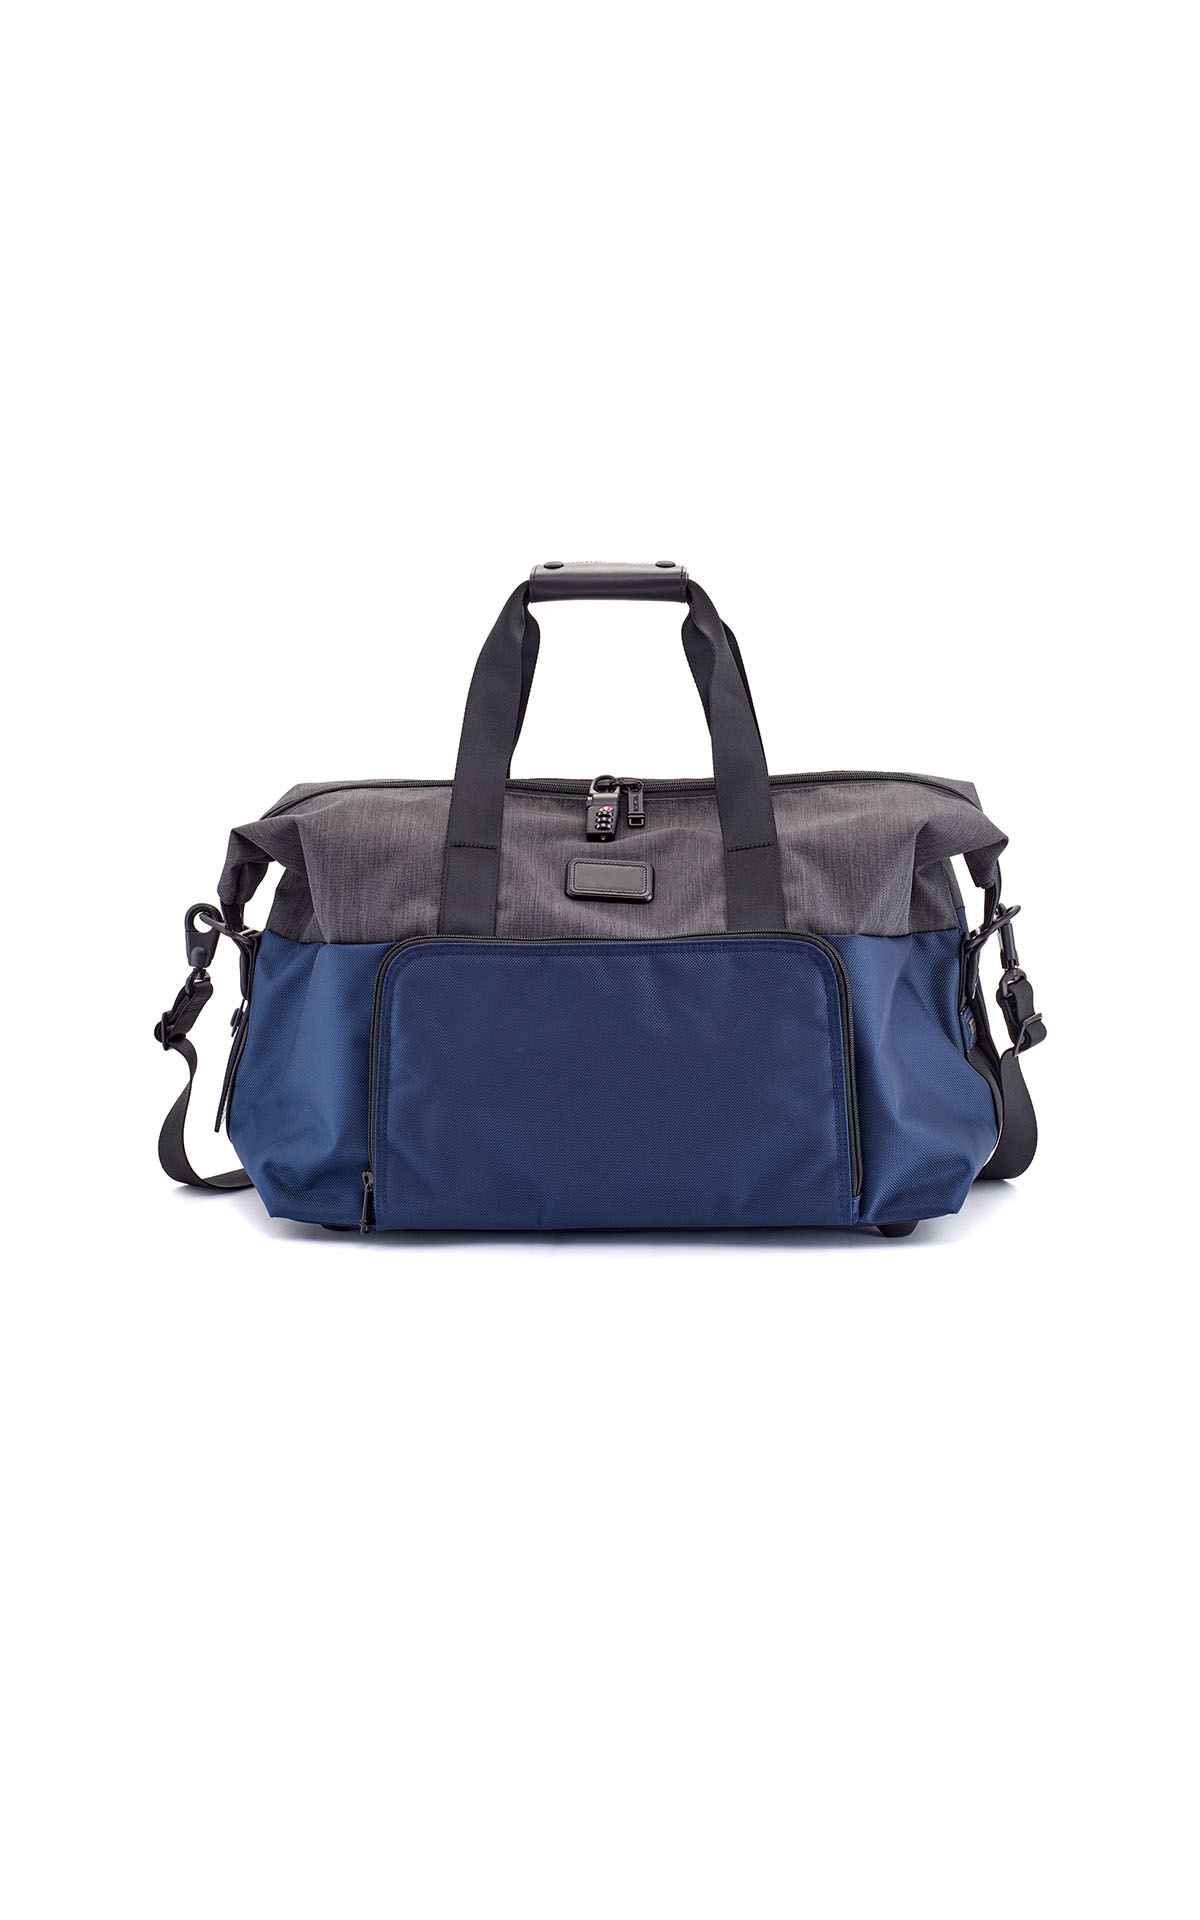 Tumi Soft Travel Satchel at The Bicester Village Shopping Collection